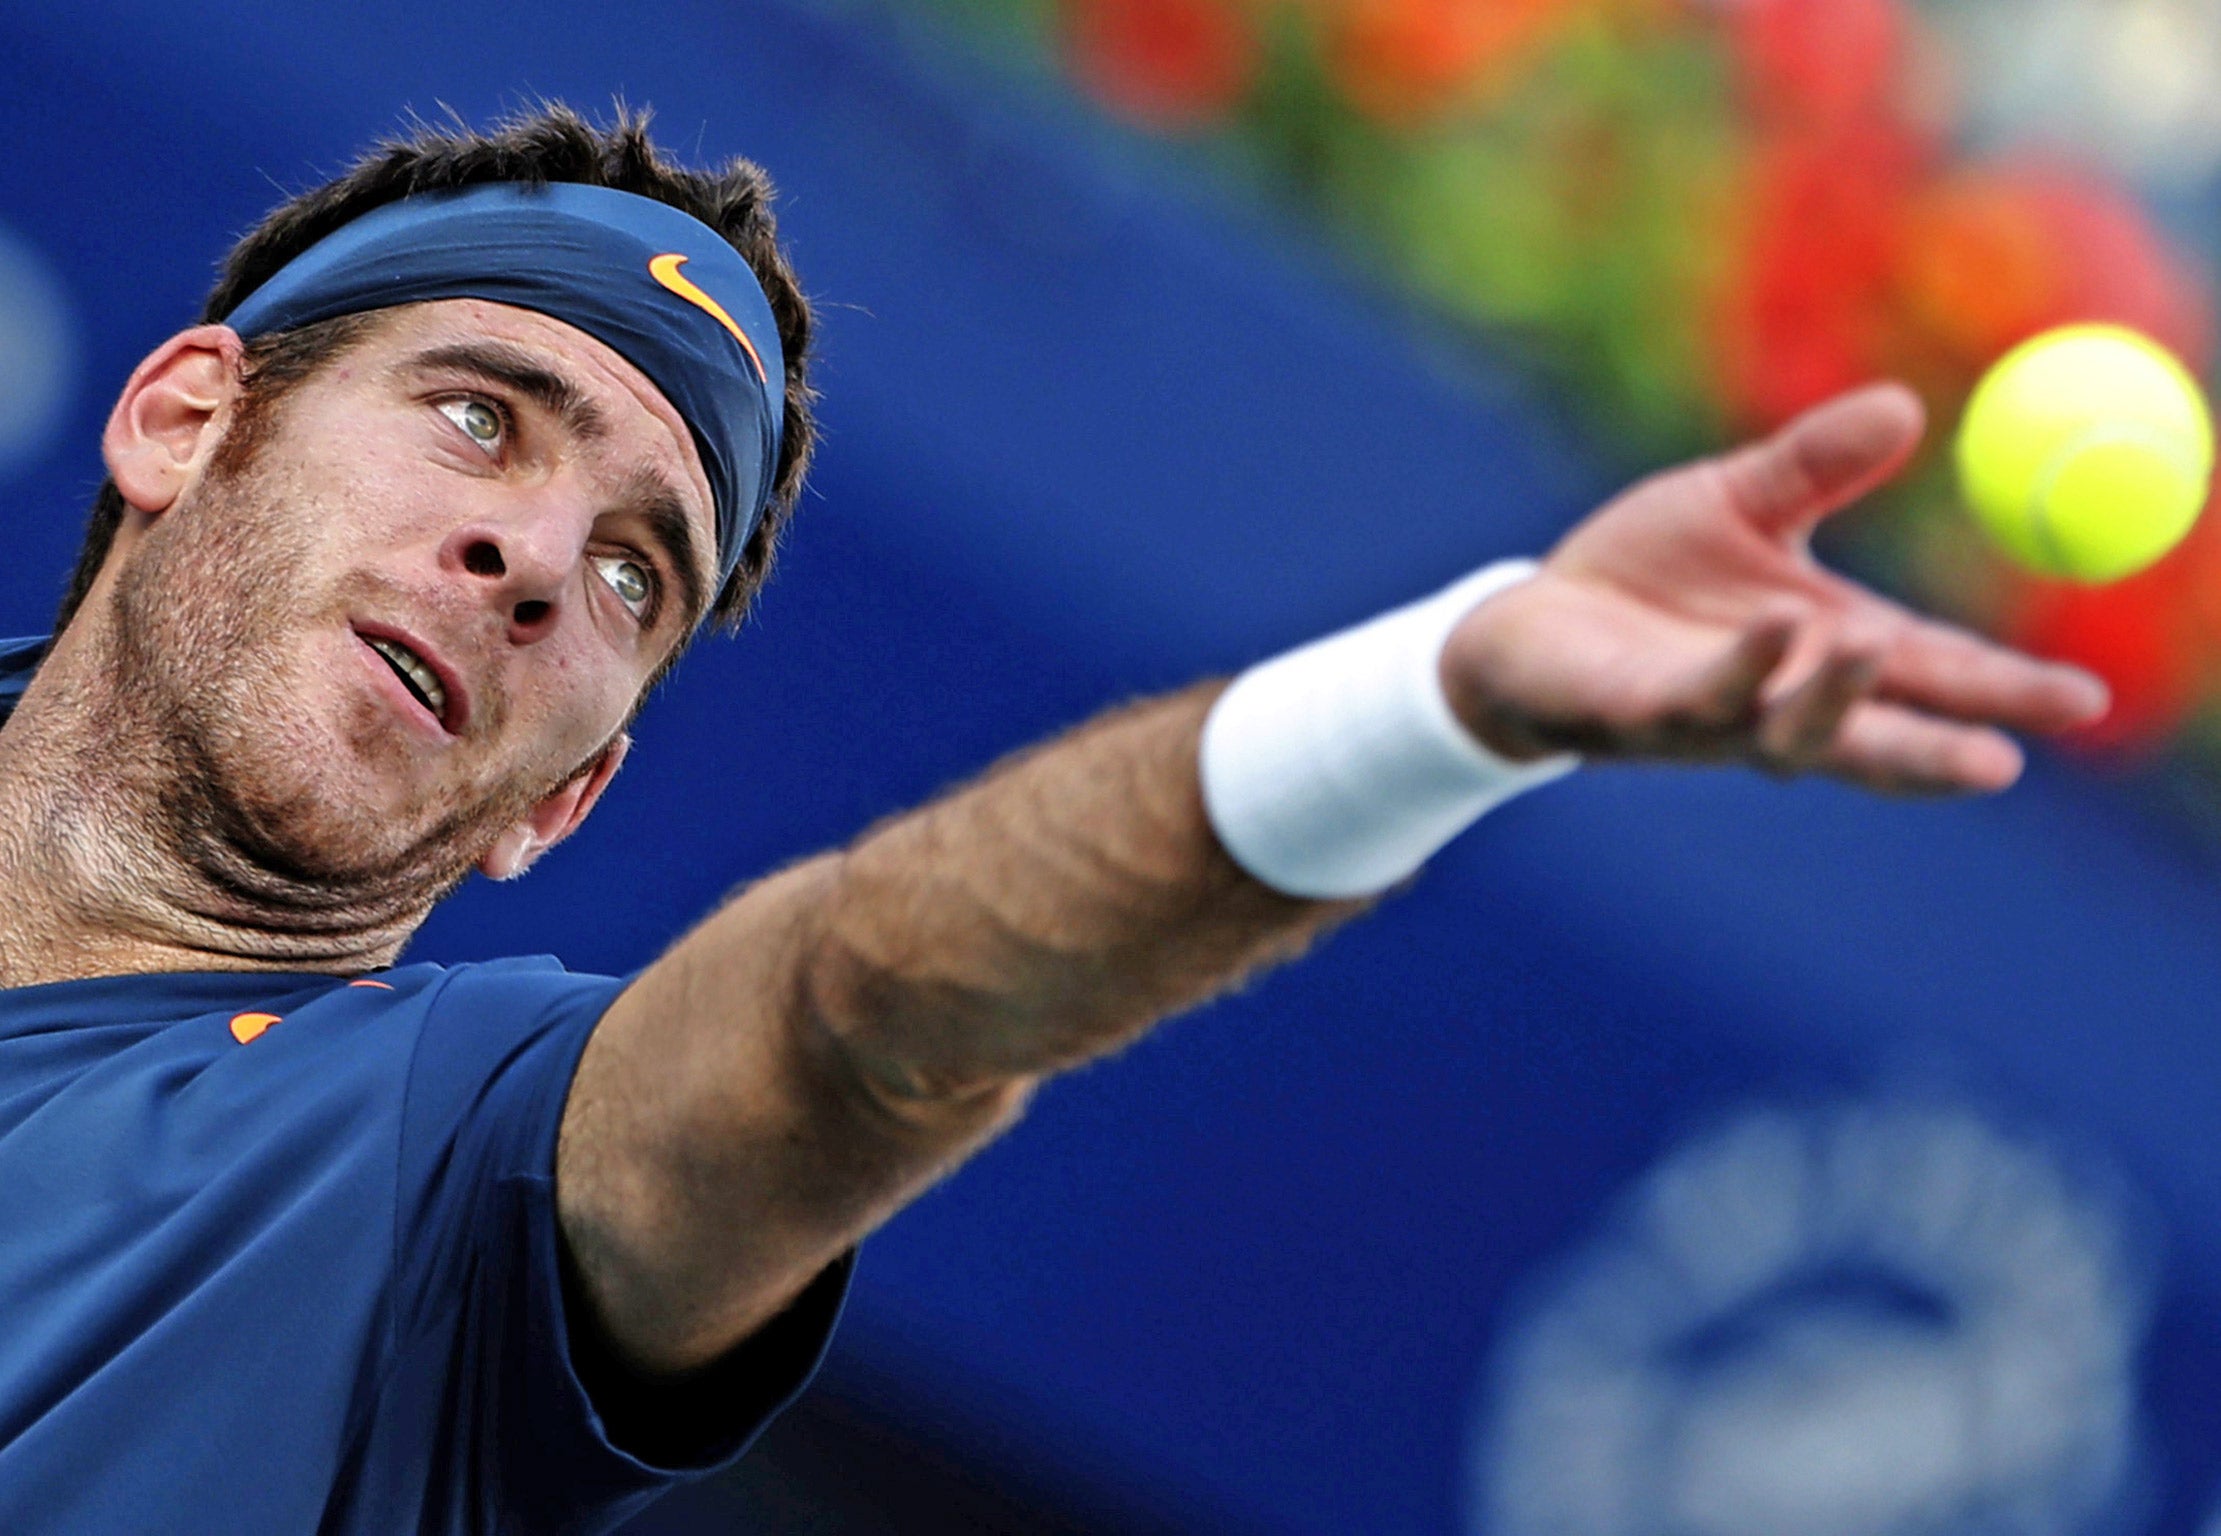 Del Potro admitted he was tired